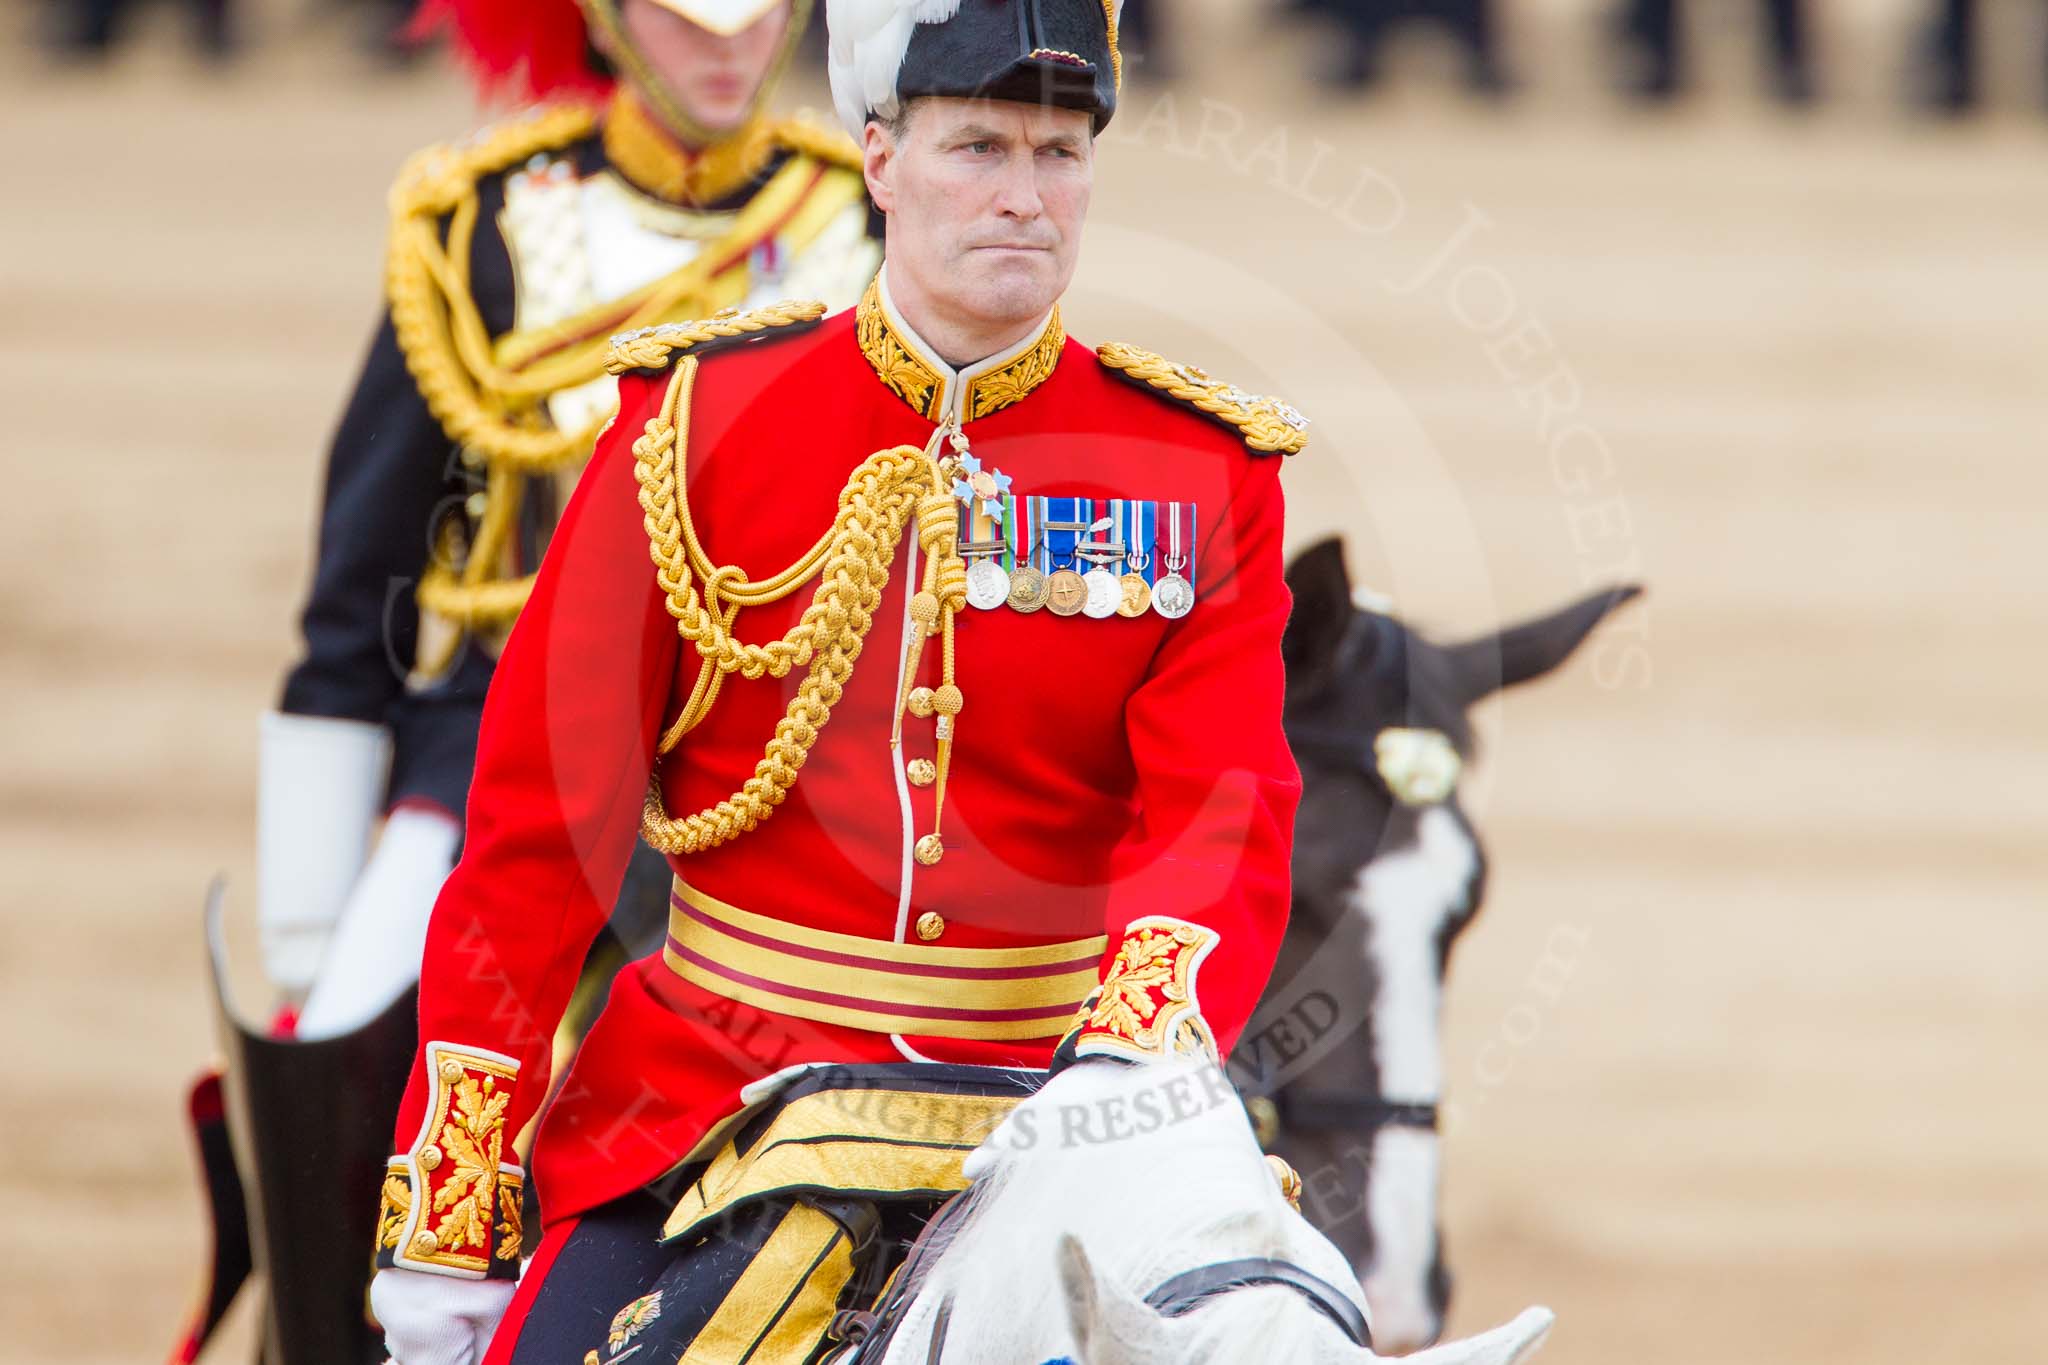 Trooping the Colour 2014.
Horse Guards Parade, Westminster,
London SW1A,

United Kingdom,
on 14 June 2014 at 11:08, image #442